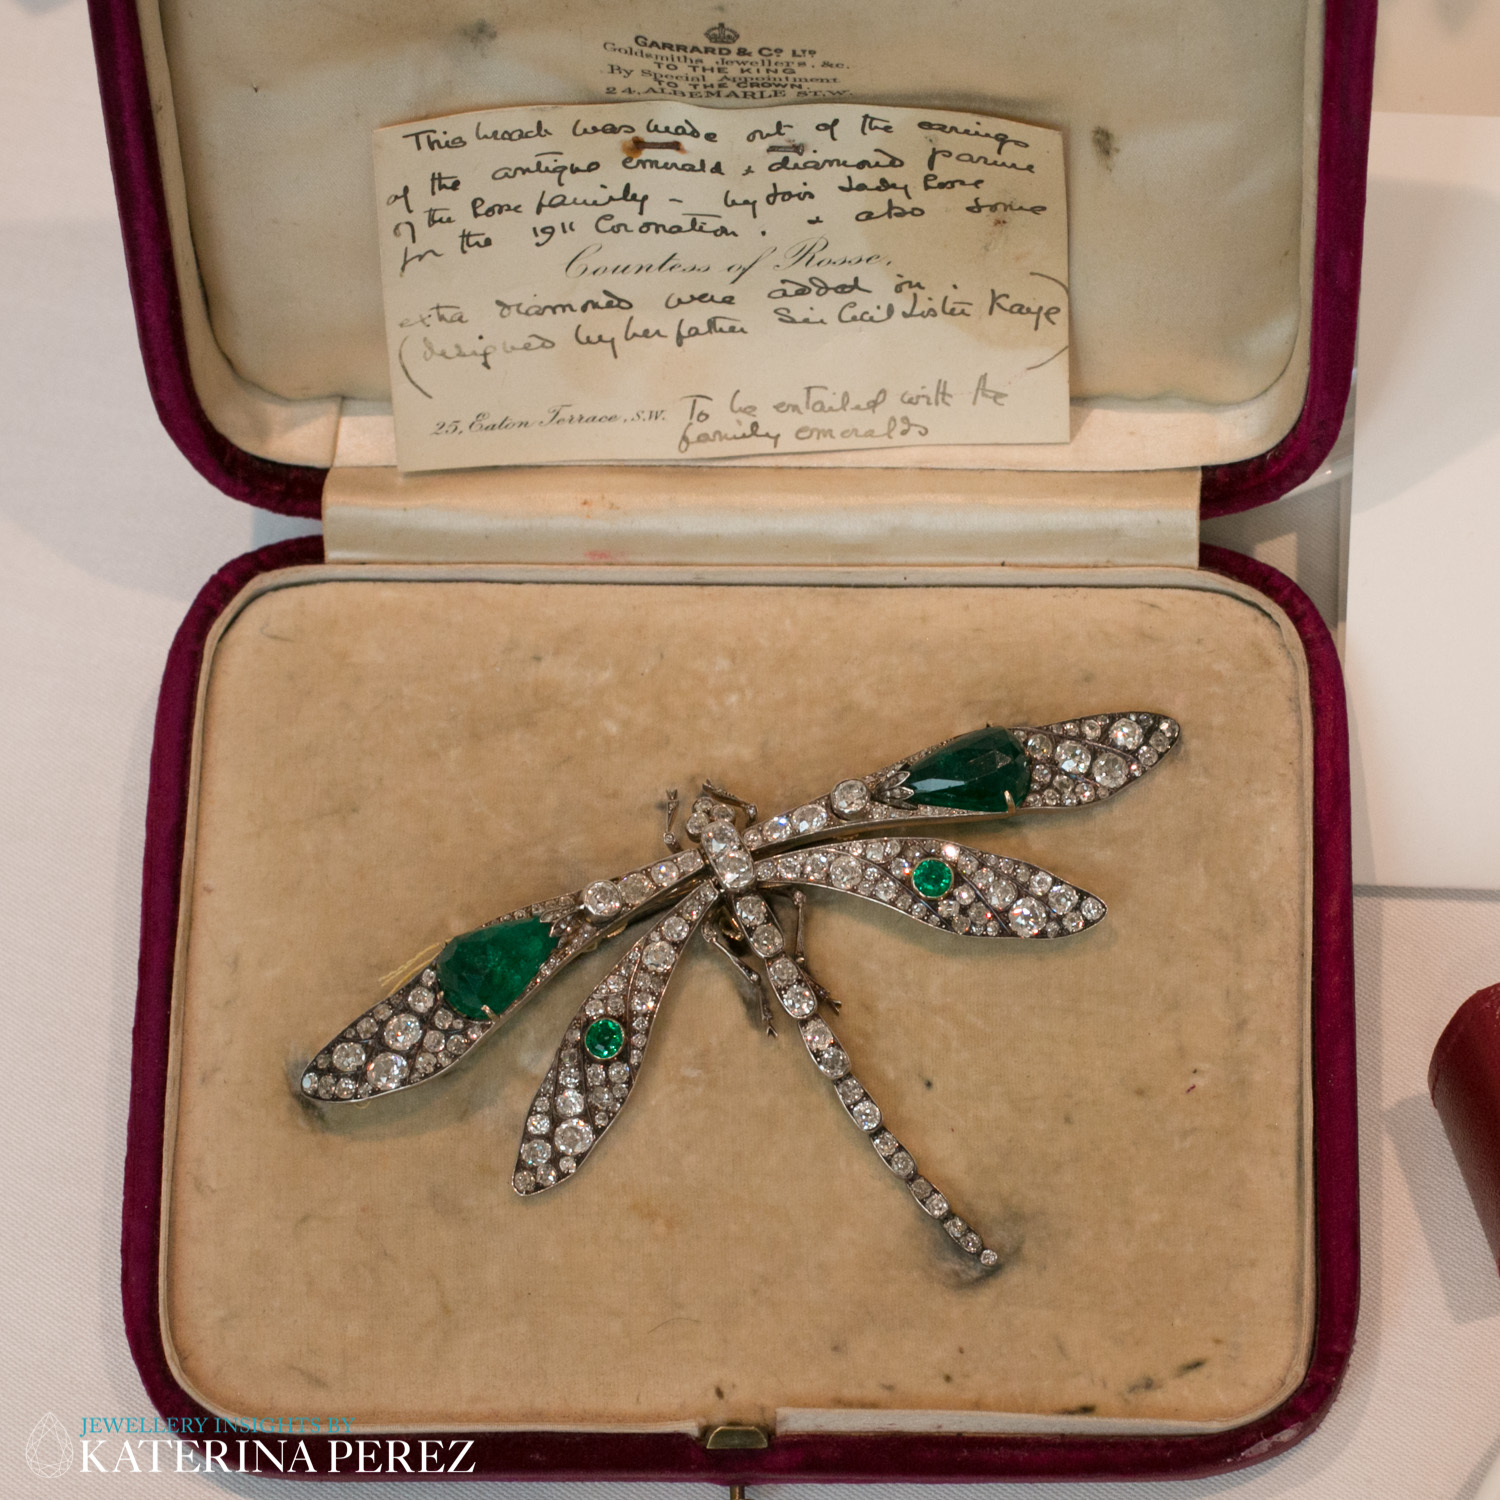 An Emerald and Diamond Dragonfly Brooch, circa 1910. Mounted in silver and yellow gold, diamonds total 13.25 carats